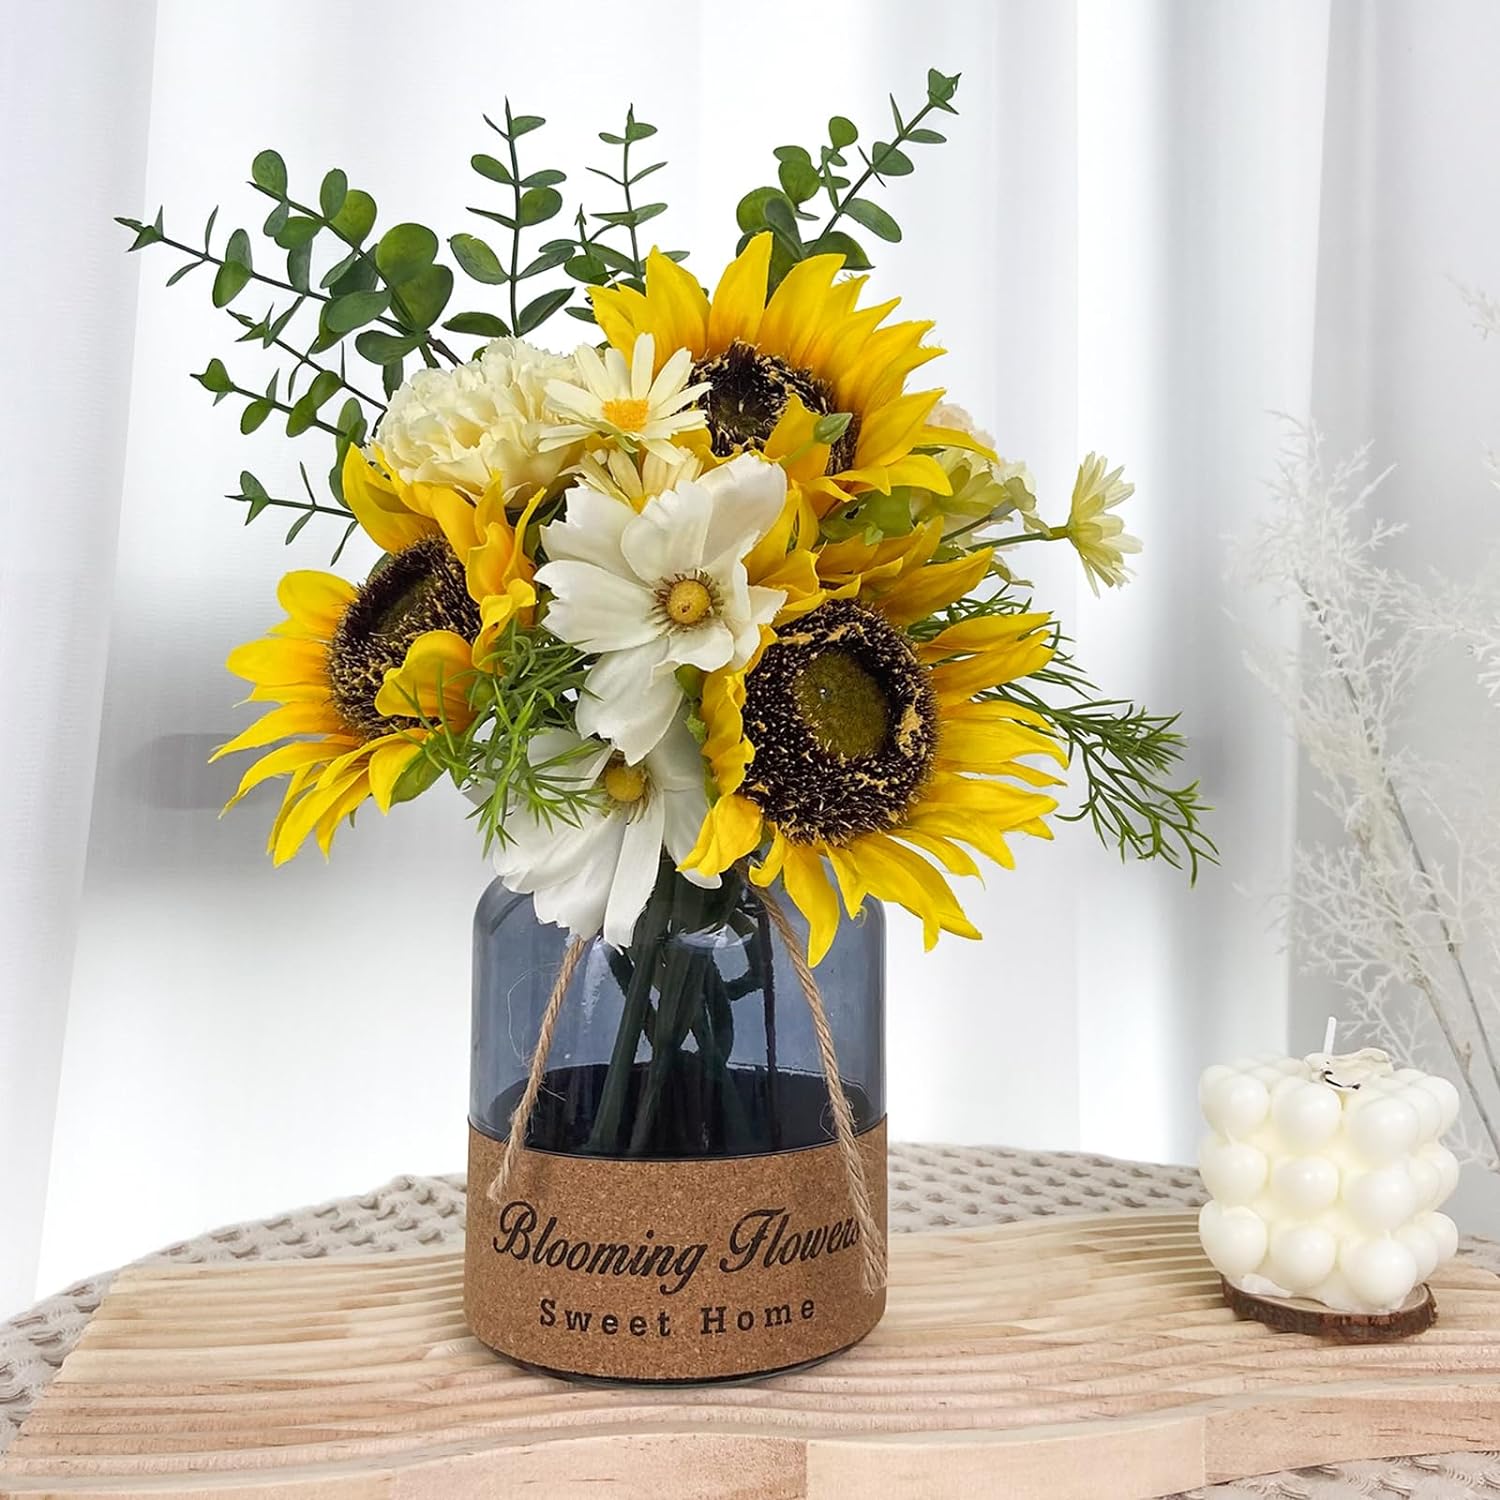 Leftover Faux Flowers in Vase,Artificial Sunflower Bouquets in Vase,Flower Centerpieces for Tables,Fake Flowers with Vase,Coffee Table Decor,Silk Flower Arrangements